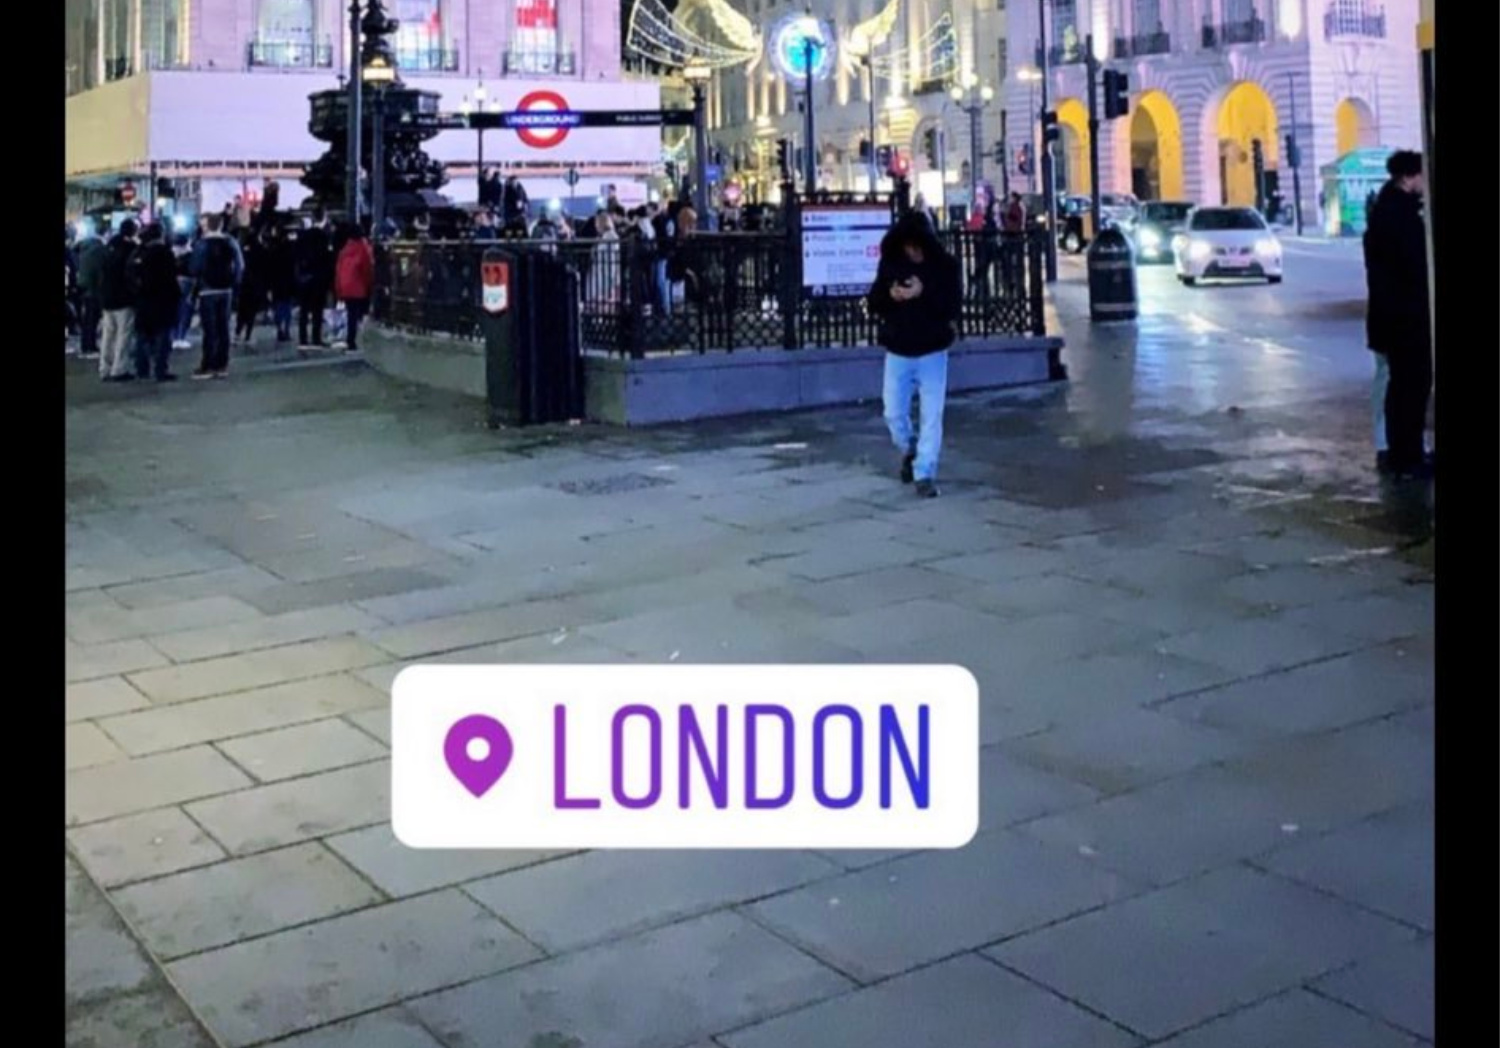 Fans take notice after rumored Arsenal target posts social media update from London